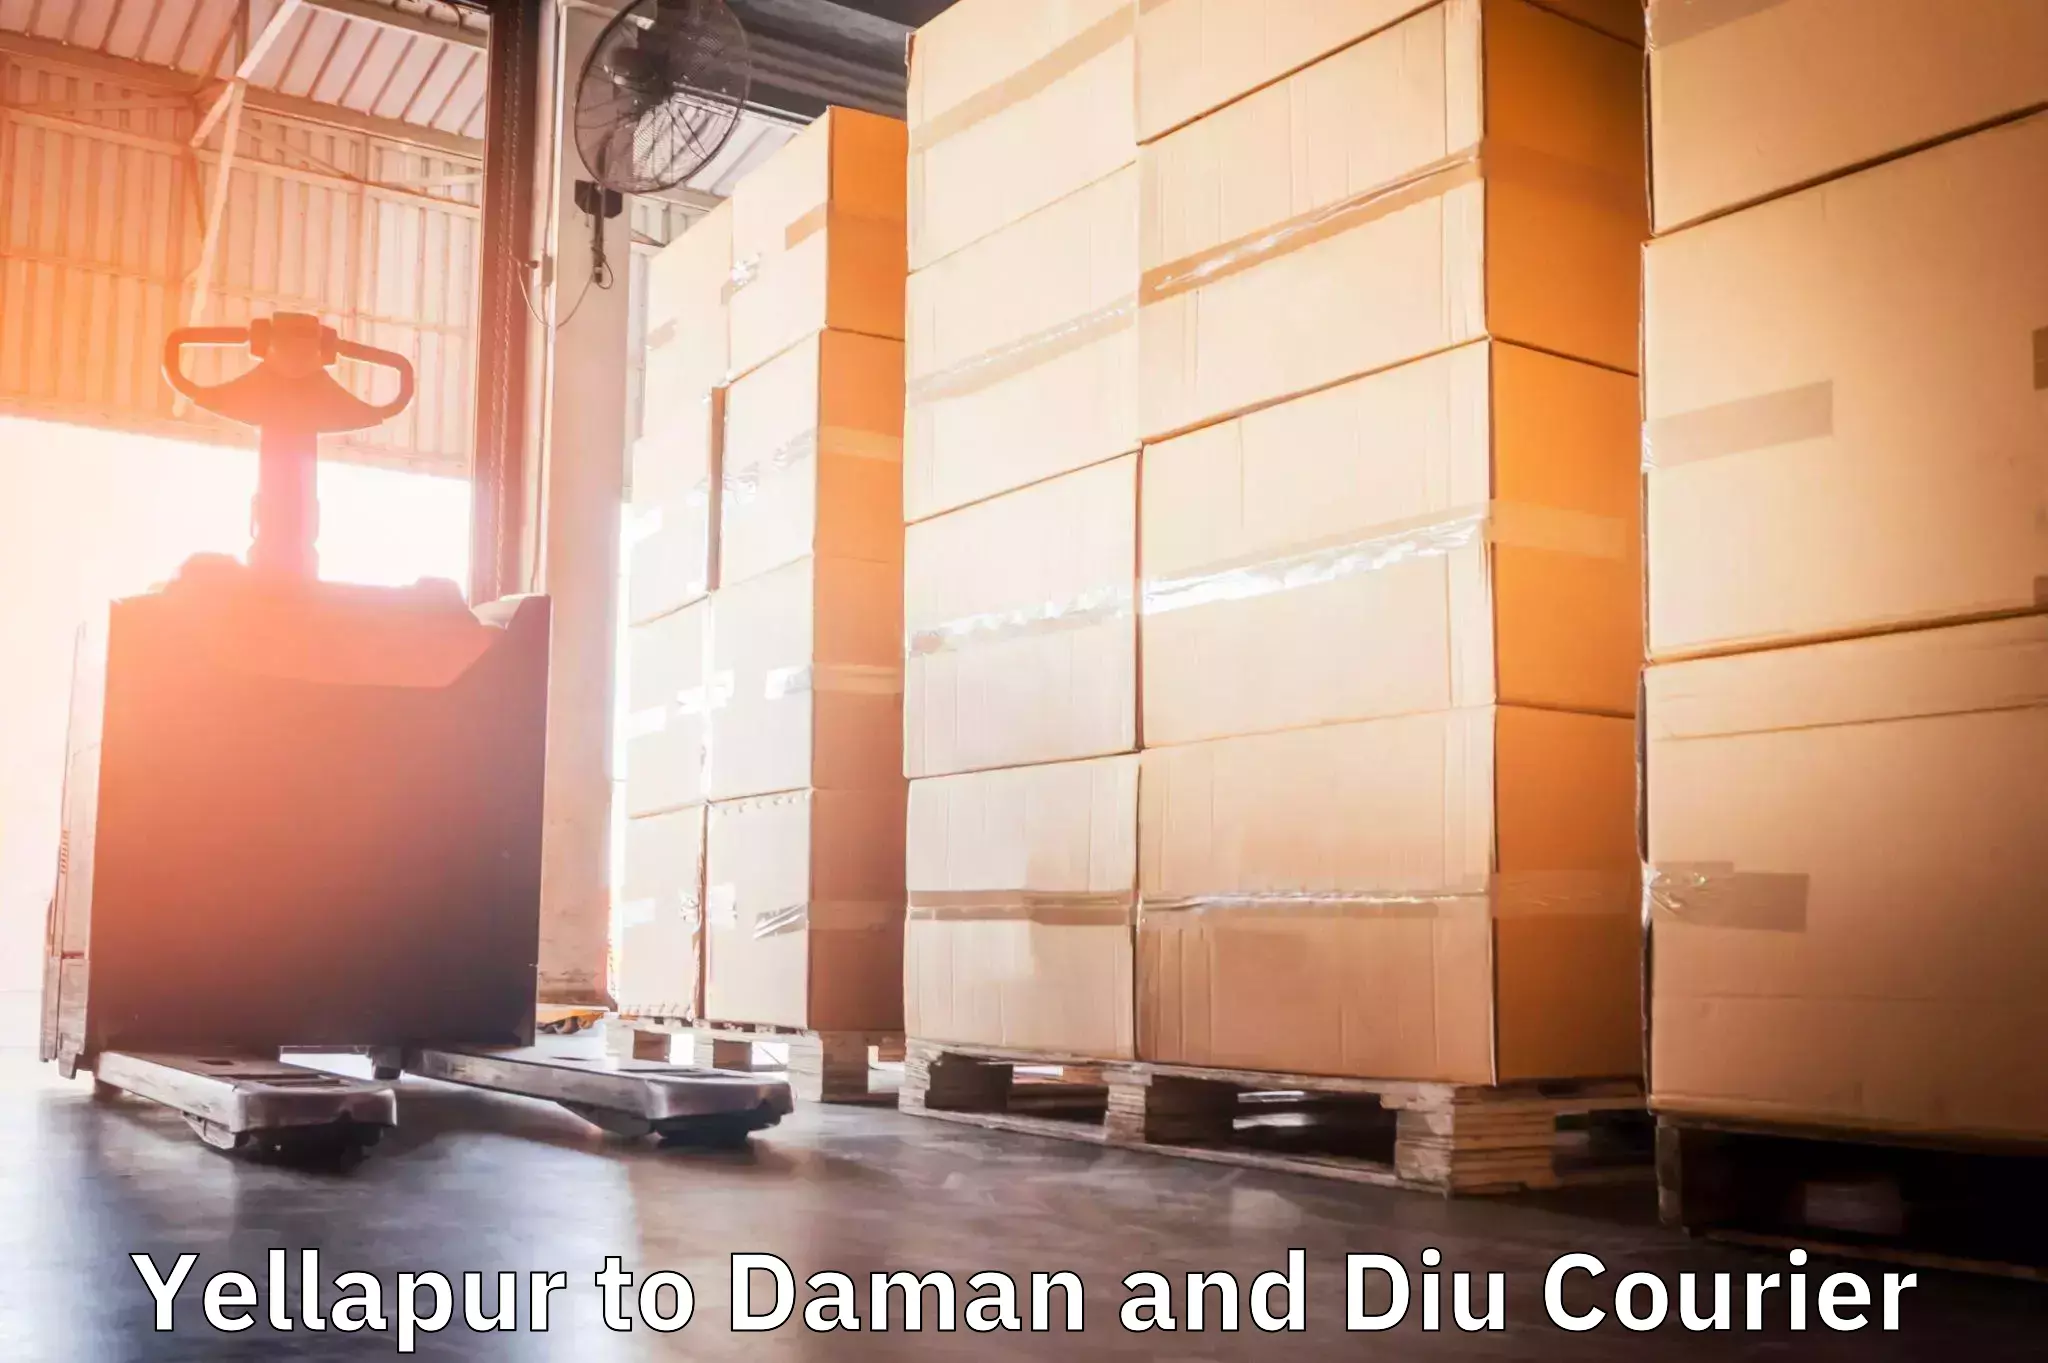 State-of-the-art courier technology Yellapur to Diu